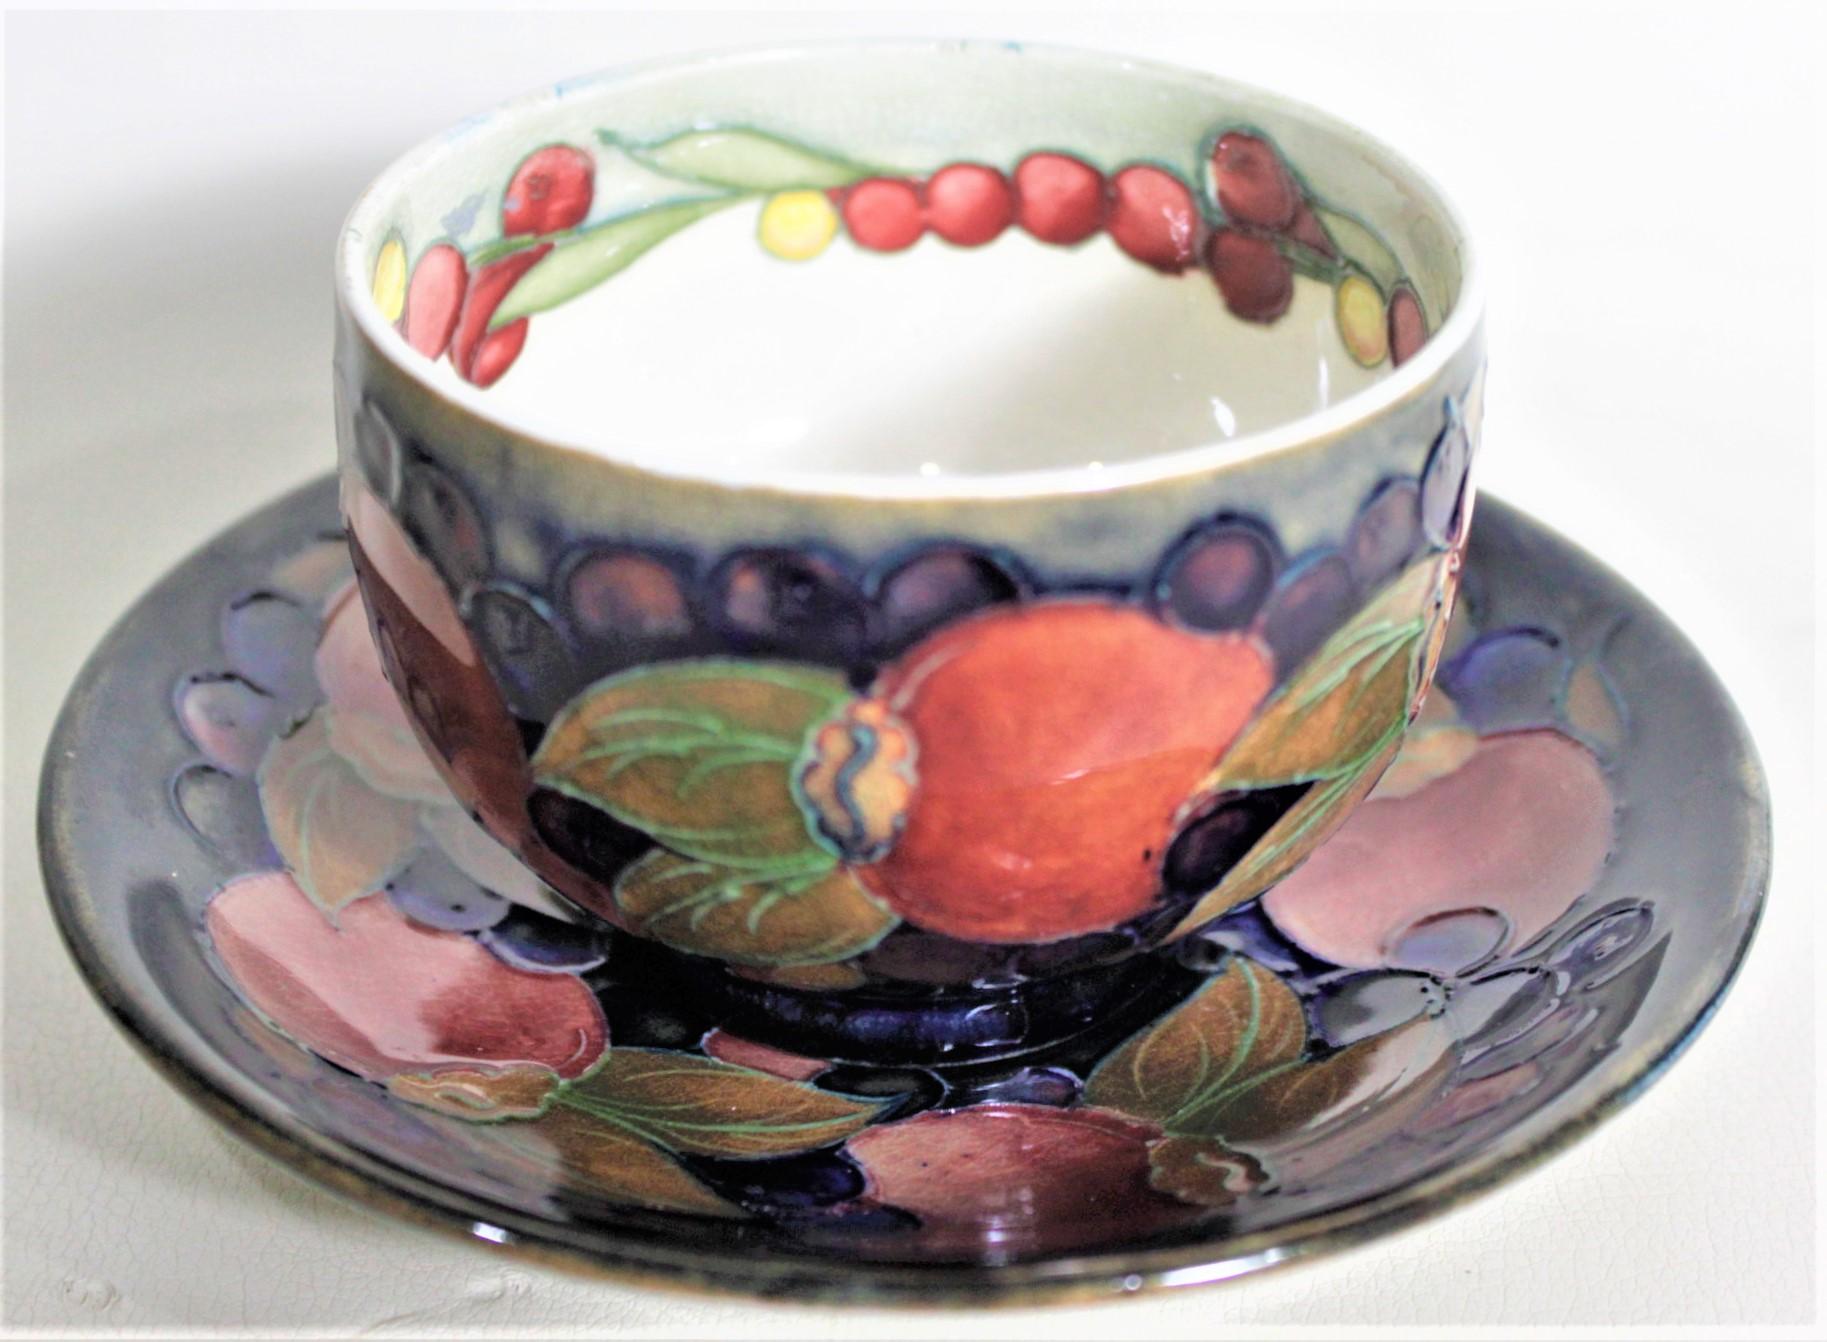 William Moorcroft Pomegranate Patterned Art Pottery Teacup & Saucer Set #1 of 4 In Good Condition For Sale In Hamilton, Ontario